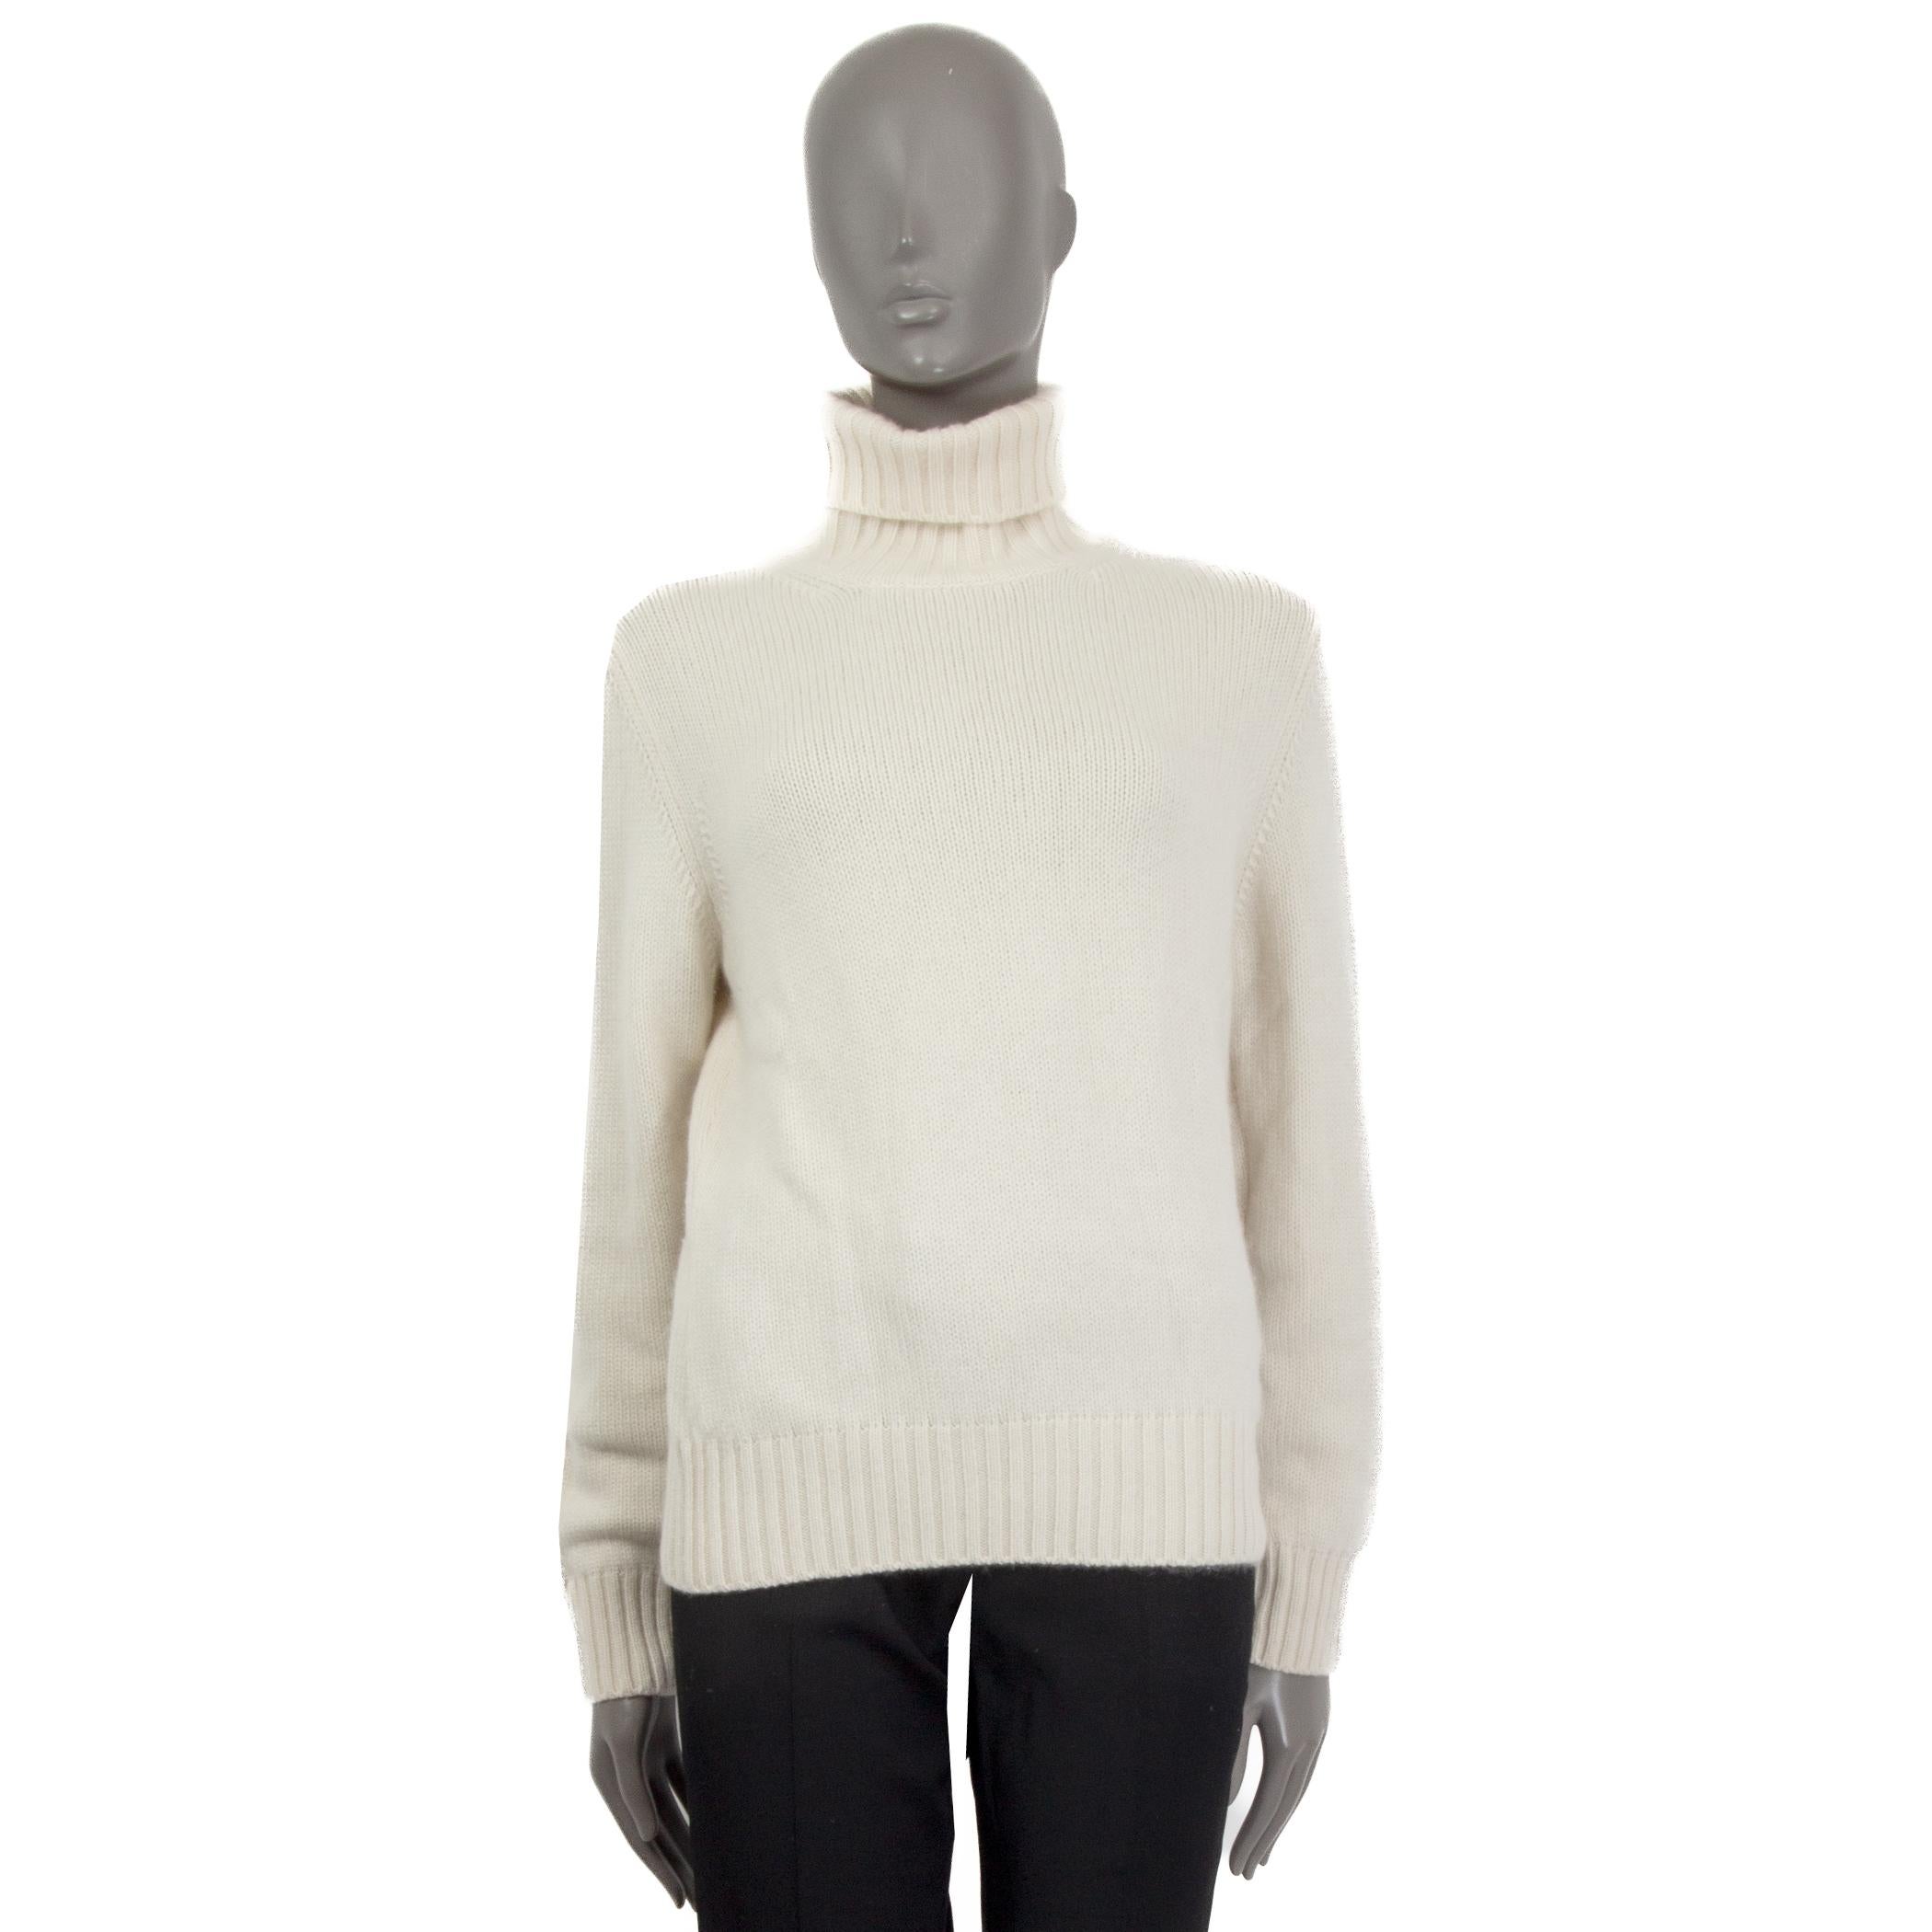 100% authentic Loro Piana turtleneck knit sweater in off-white cashmere (100%). Features long sleeves, a ribbed hemline and ribbed cuffs. Unlined. Has been worn and is in excellent condition.

Measurements
Tag Size	46
Size	XL
Shoulder Width	41cm